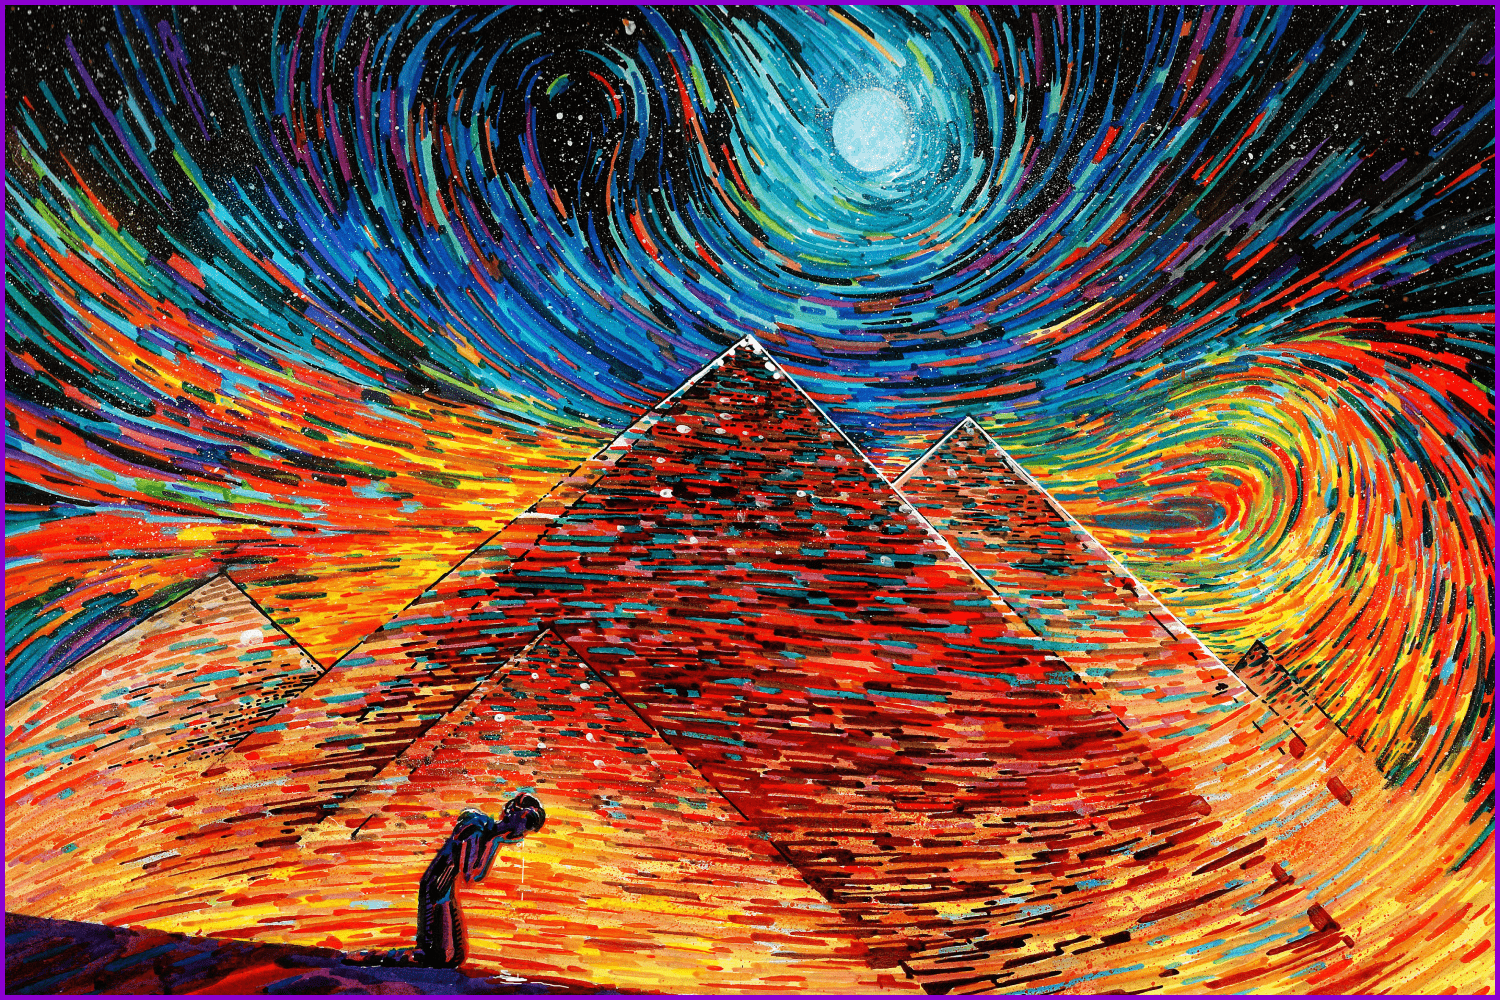 Figure against the background of the pyramids in the technique of Van Gogh.